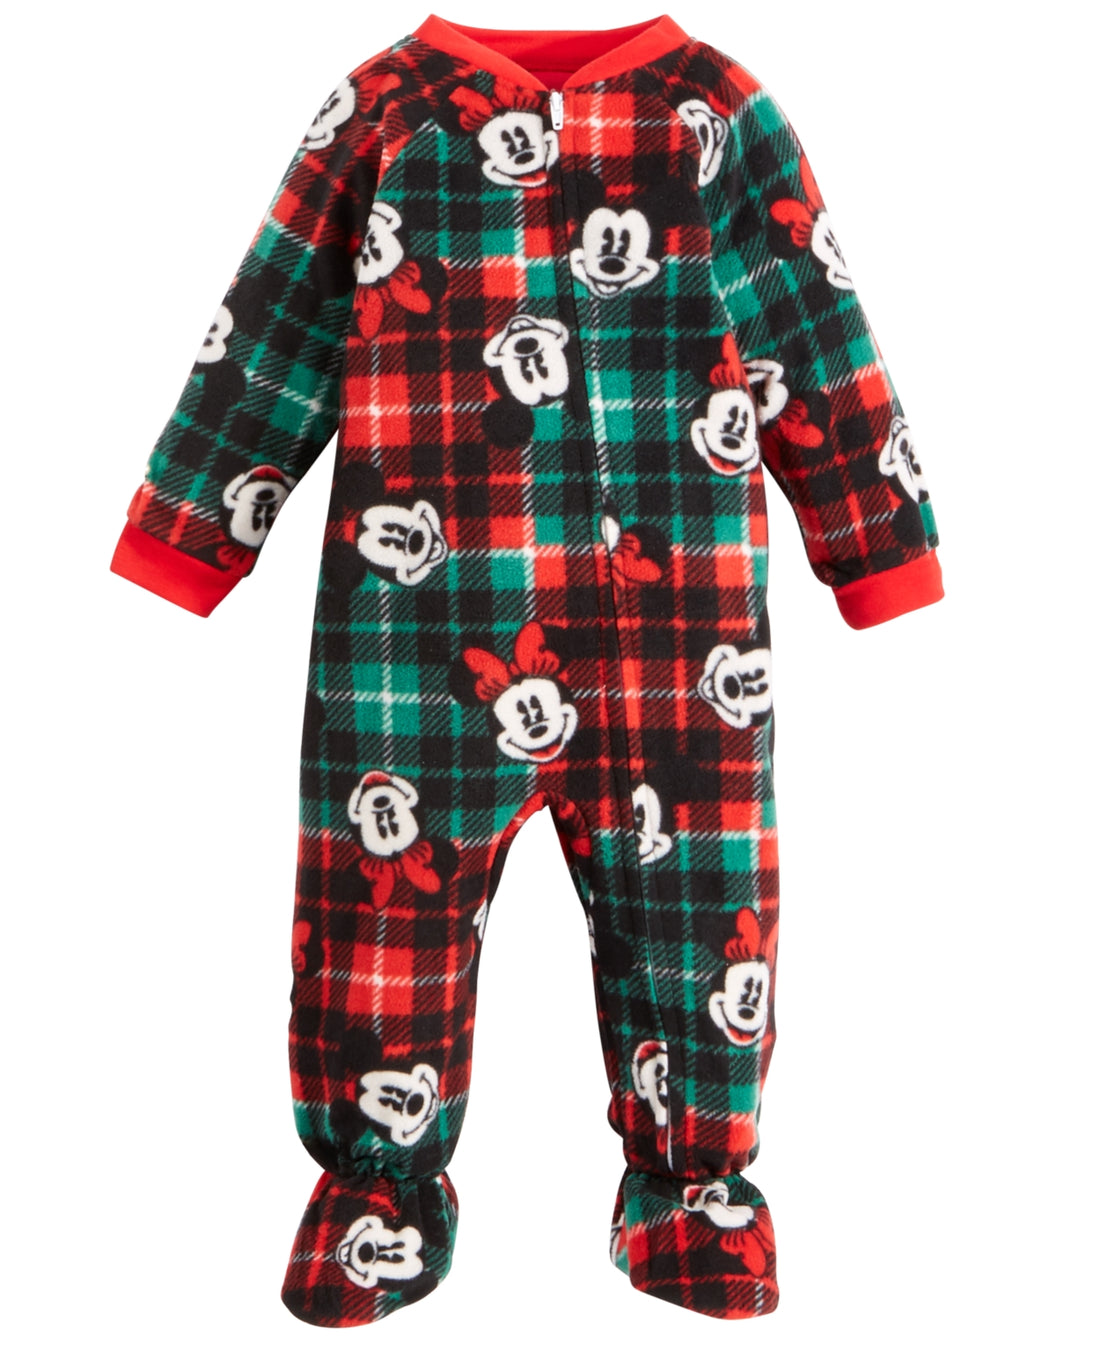 Ame Infant Boys Fleece Mickey And Minnie Mouse Footed Pajama